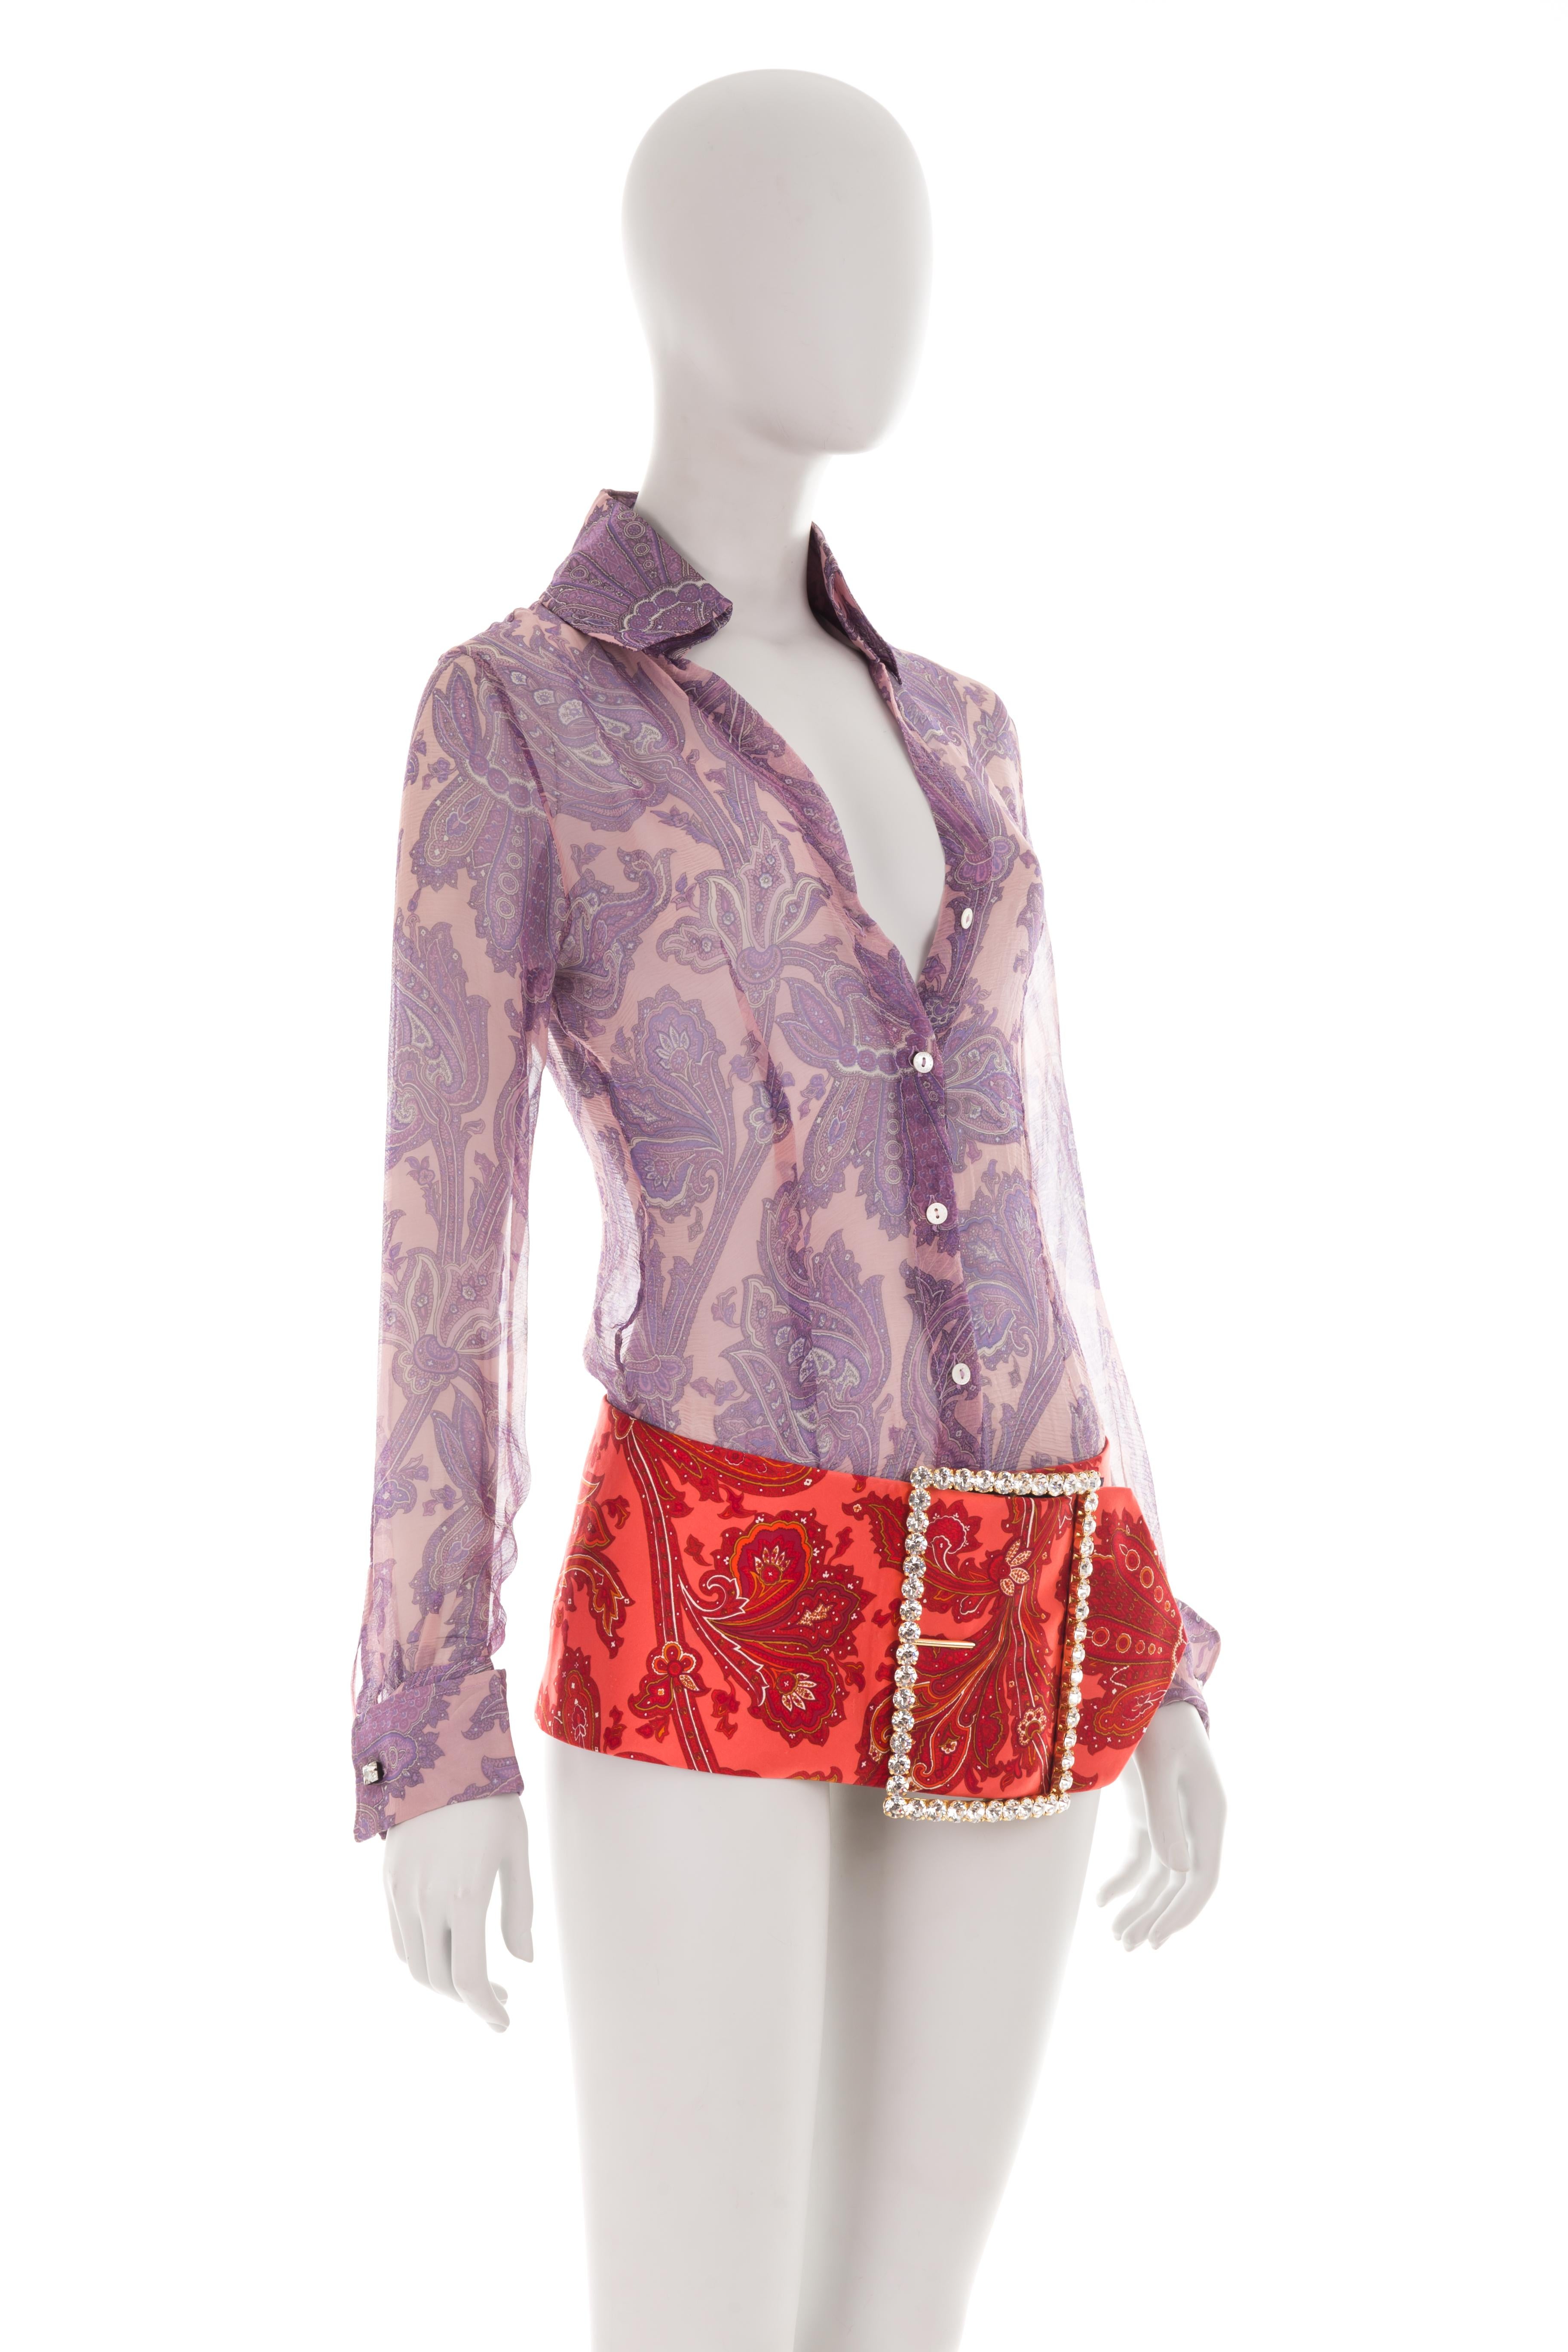 - Spring- summer 2000 “Mix & Match” collection - Sold by Gold Palms Vintage
- Purple silk low plunge shirt
- Swarovski cuffs
- Red paisley micro skirt
- Chunky Swarovski buckle
- Velcro strap closure
- Seen on Look 34, worn by Trish Goff - Size: IT